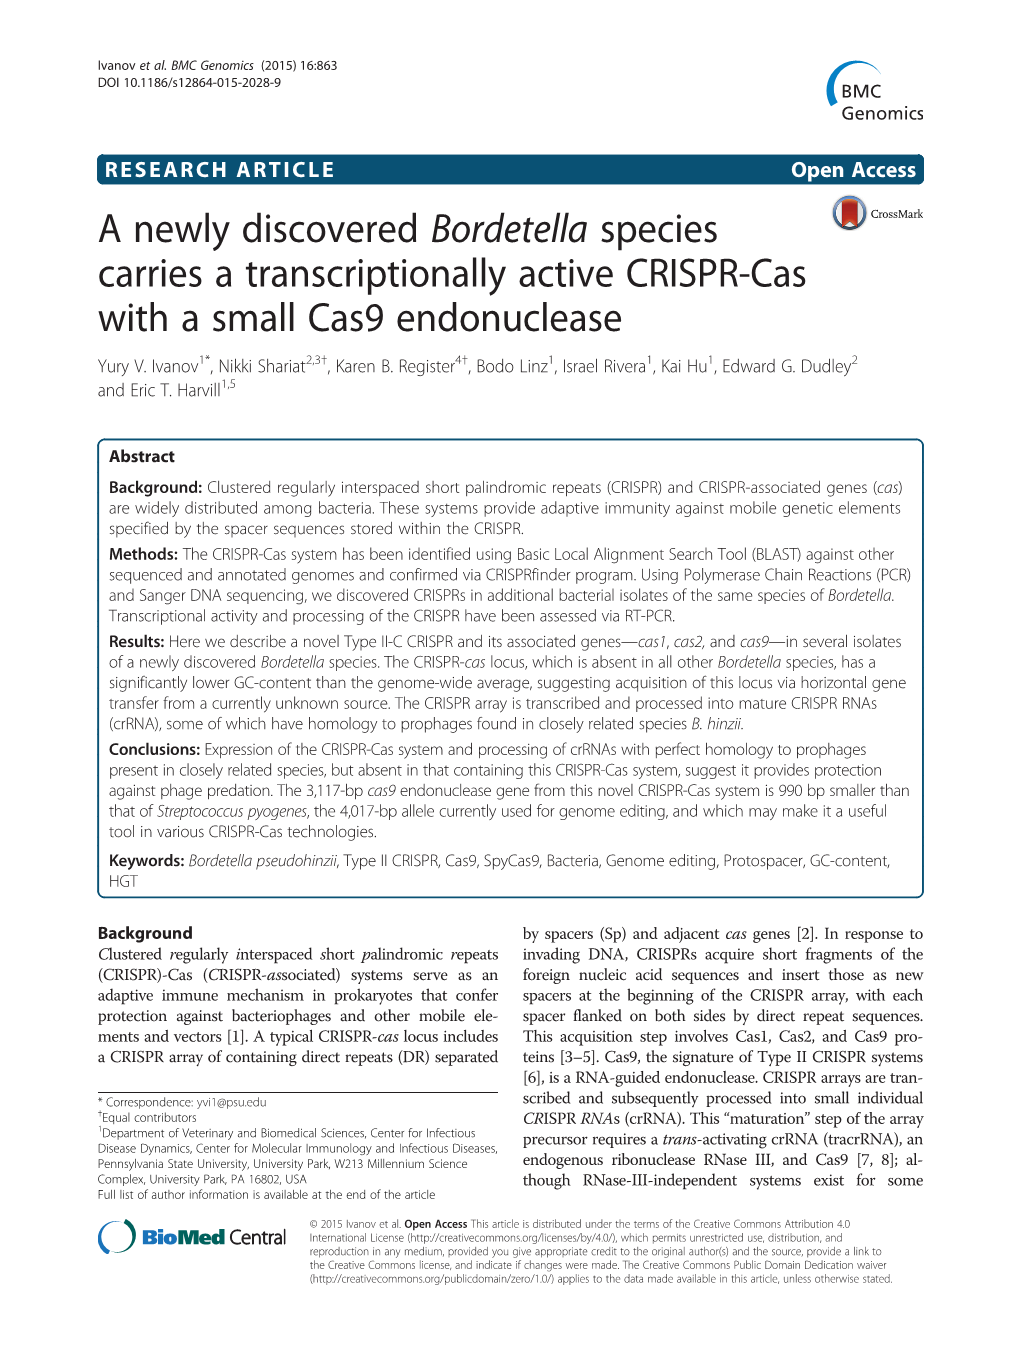 A Newly Discovered Bordetella Species Carries a Transcriptionally Active CRISPR-Cas with a Small Cas9 Endonuclease Yury V